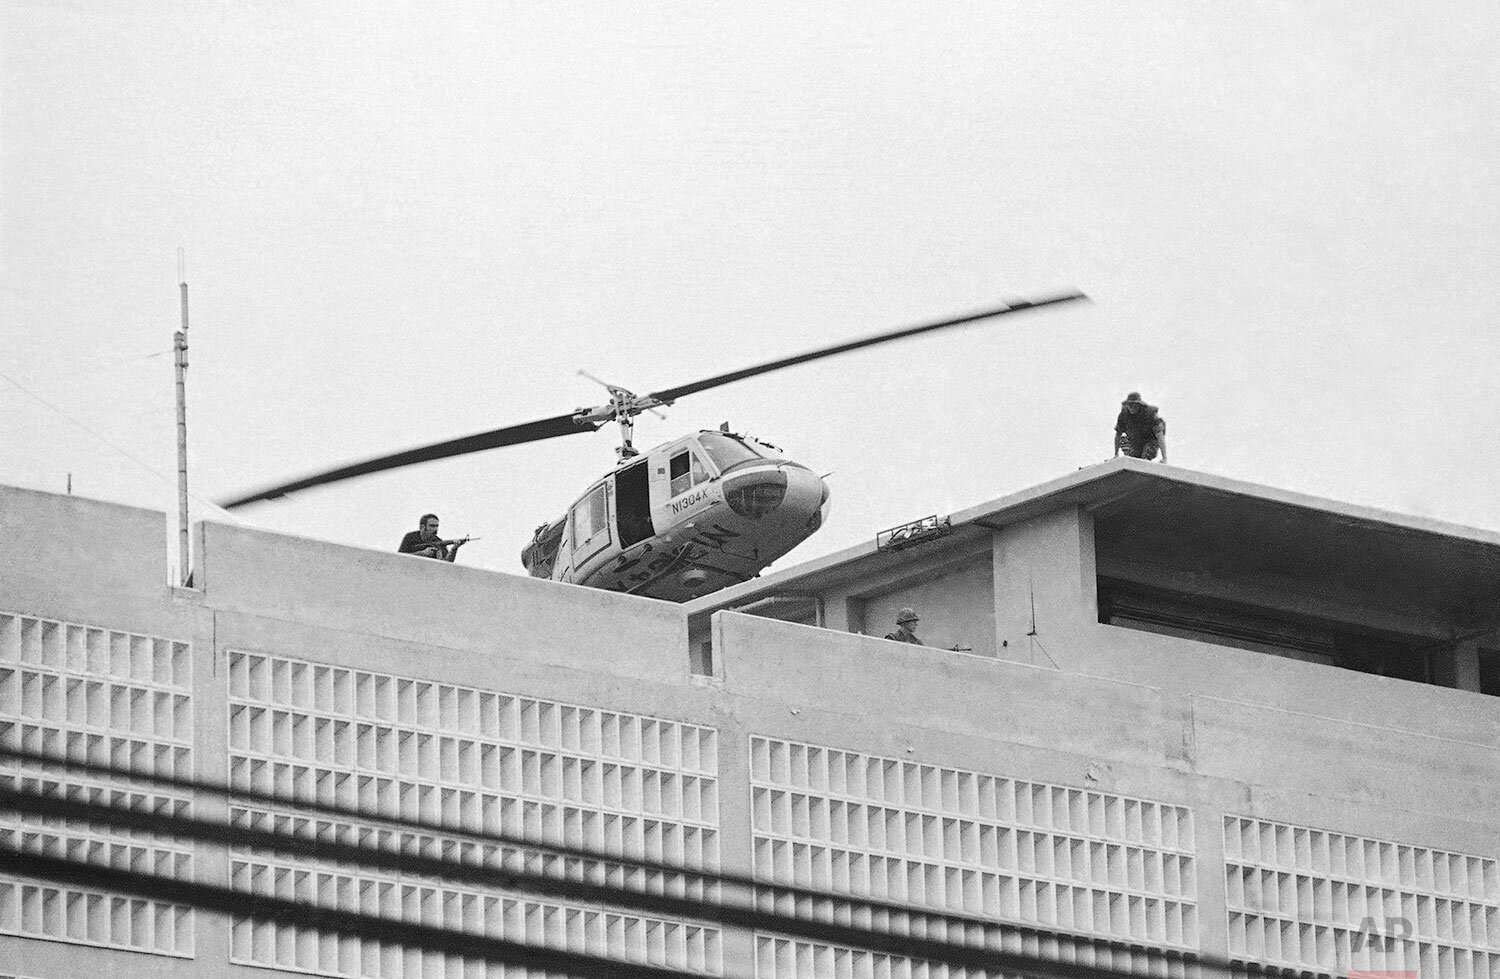  A U.S. Marine helicopter takes off from helipad on top of the American Embassy in Saigon, Vietnam, April 30, 1975. (AP Photo/Phu) 